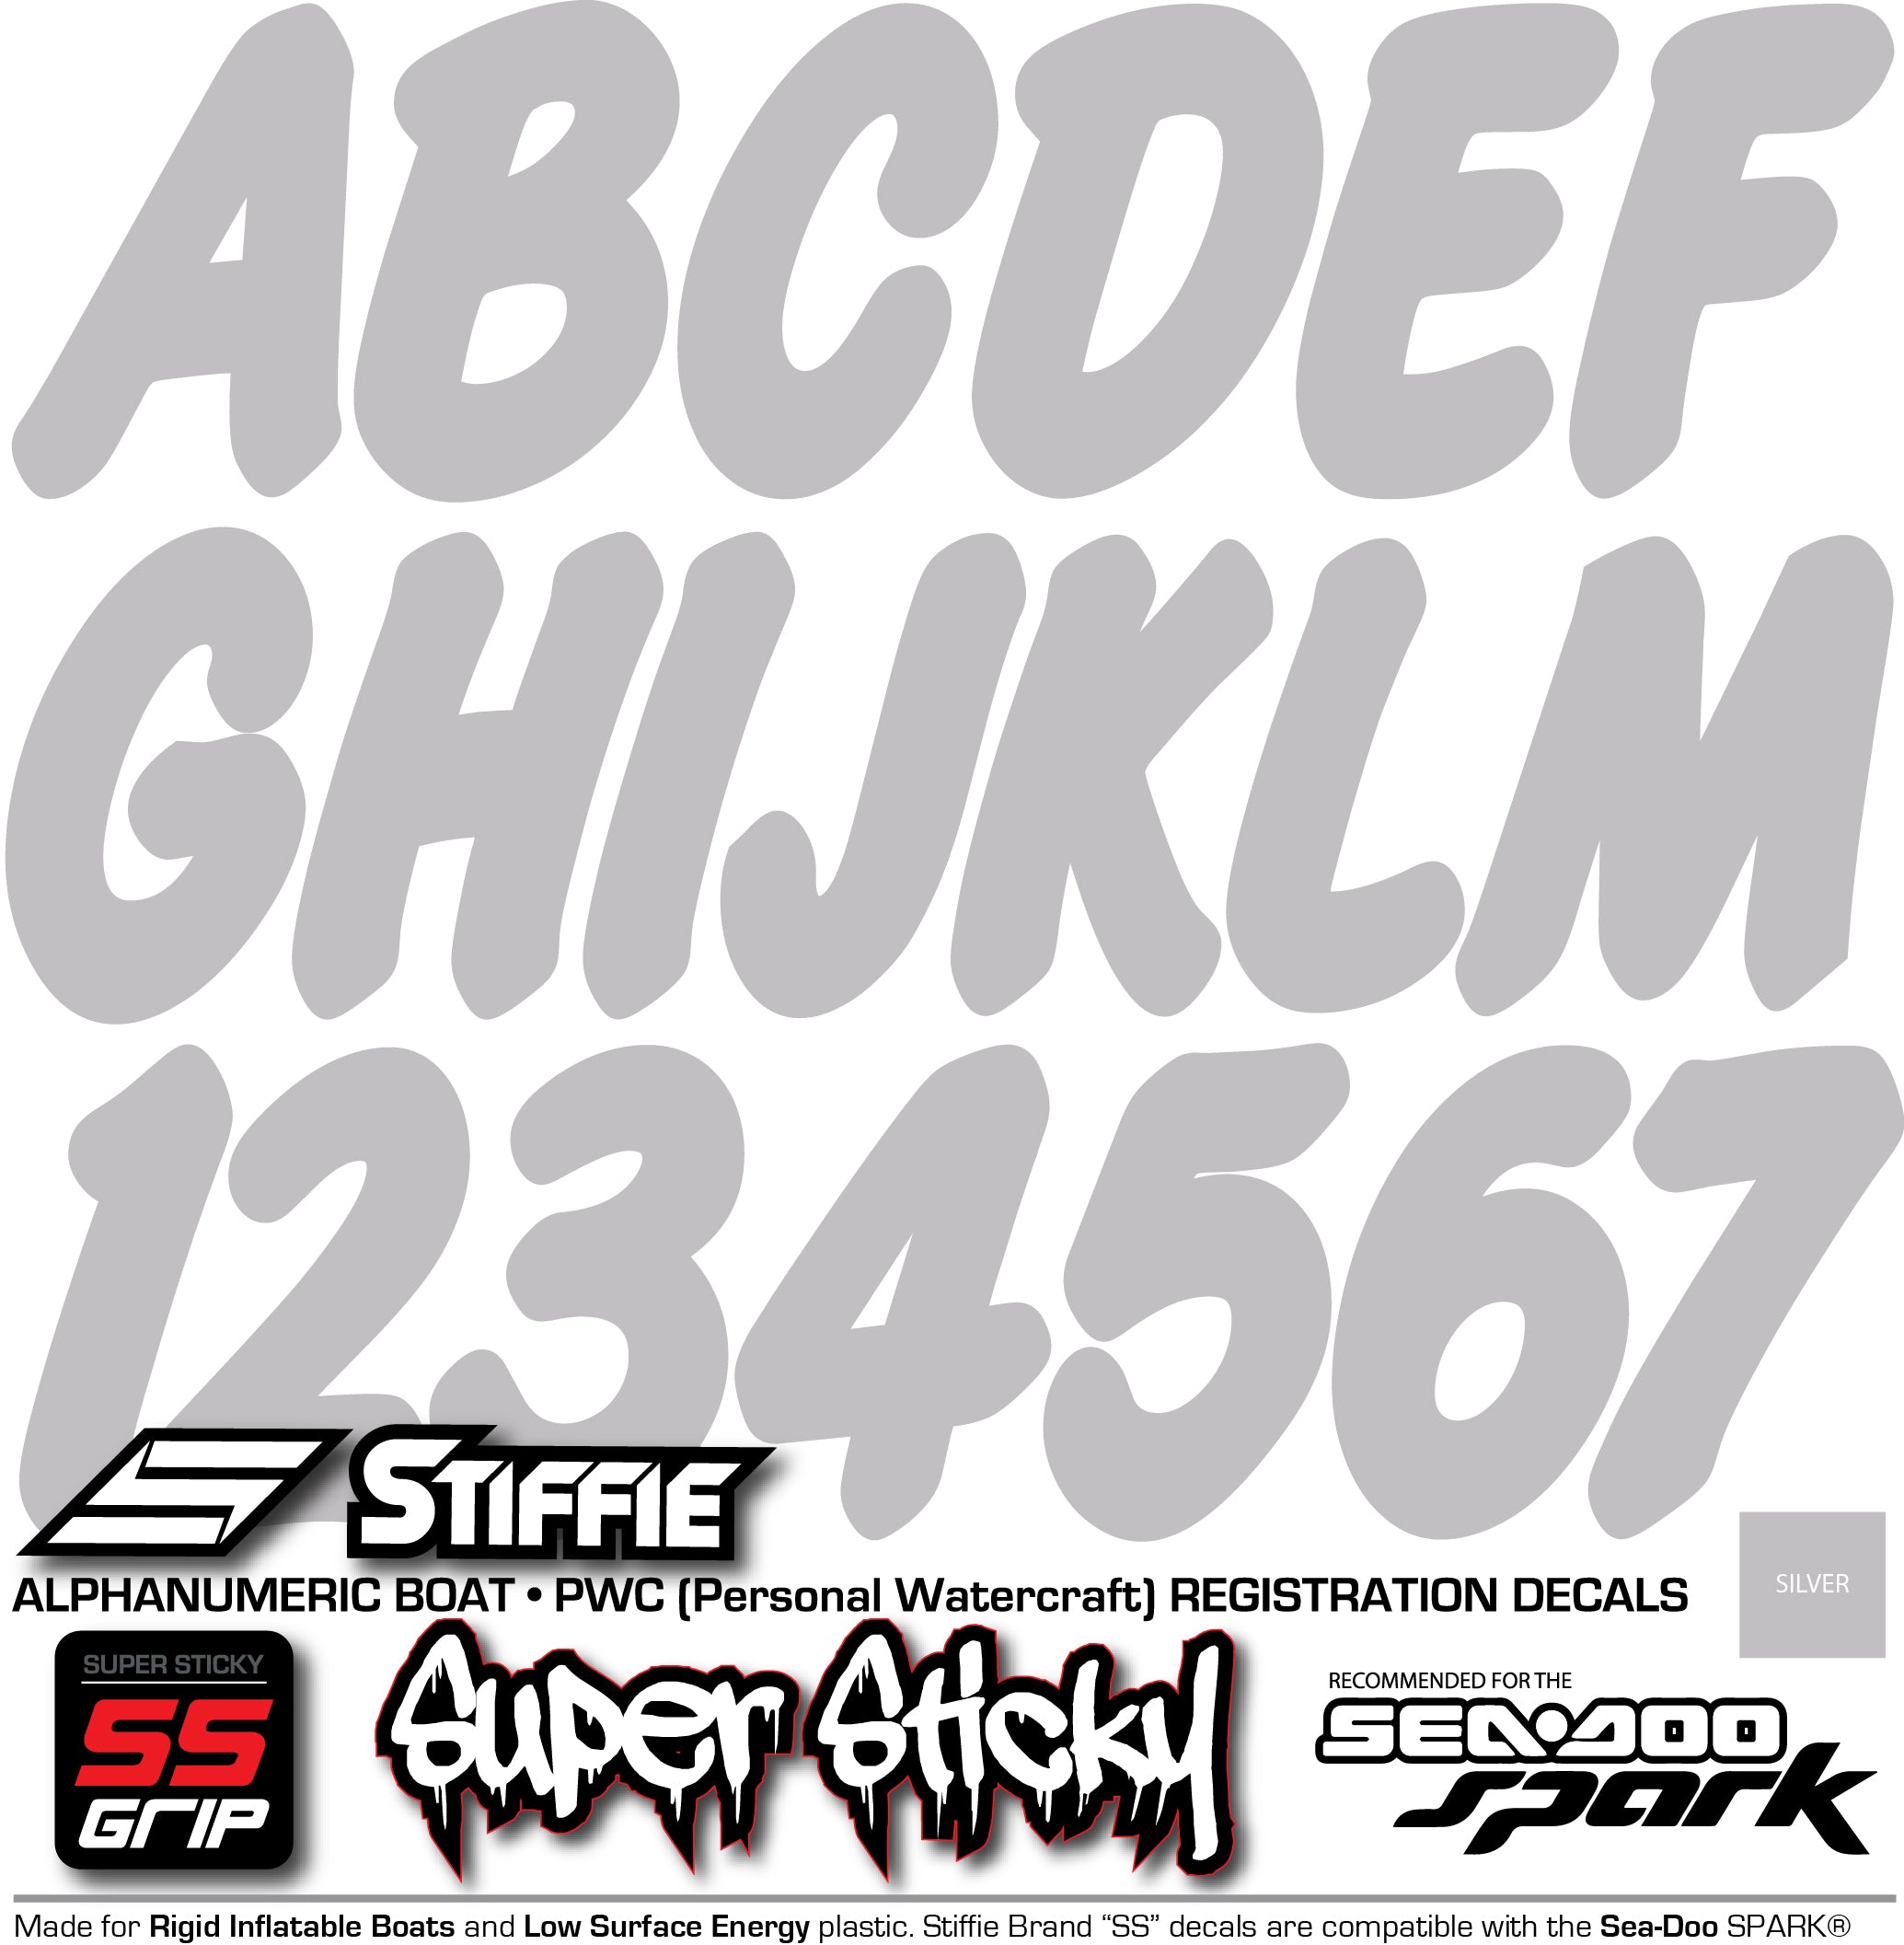 Stiffie Whip-One Silver Super Sticky 3" Alpha Numeric Registration Identification Numbers Stickers Decals for Sea-Doo Spark, Inflatable Boats, Ribs, Hypalon/PVC, PWC and Boats